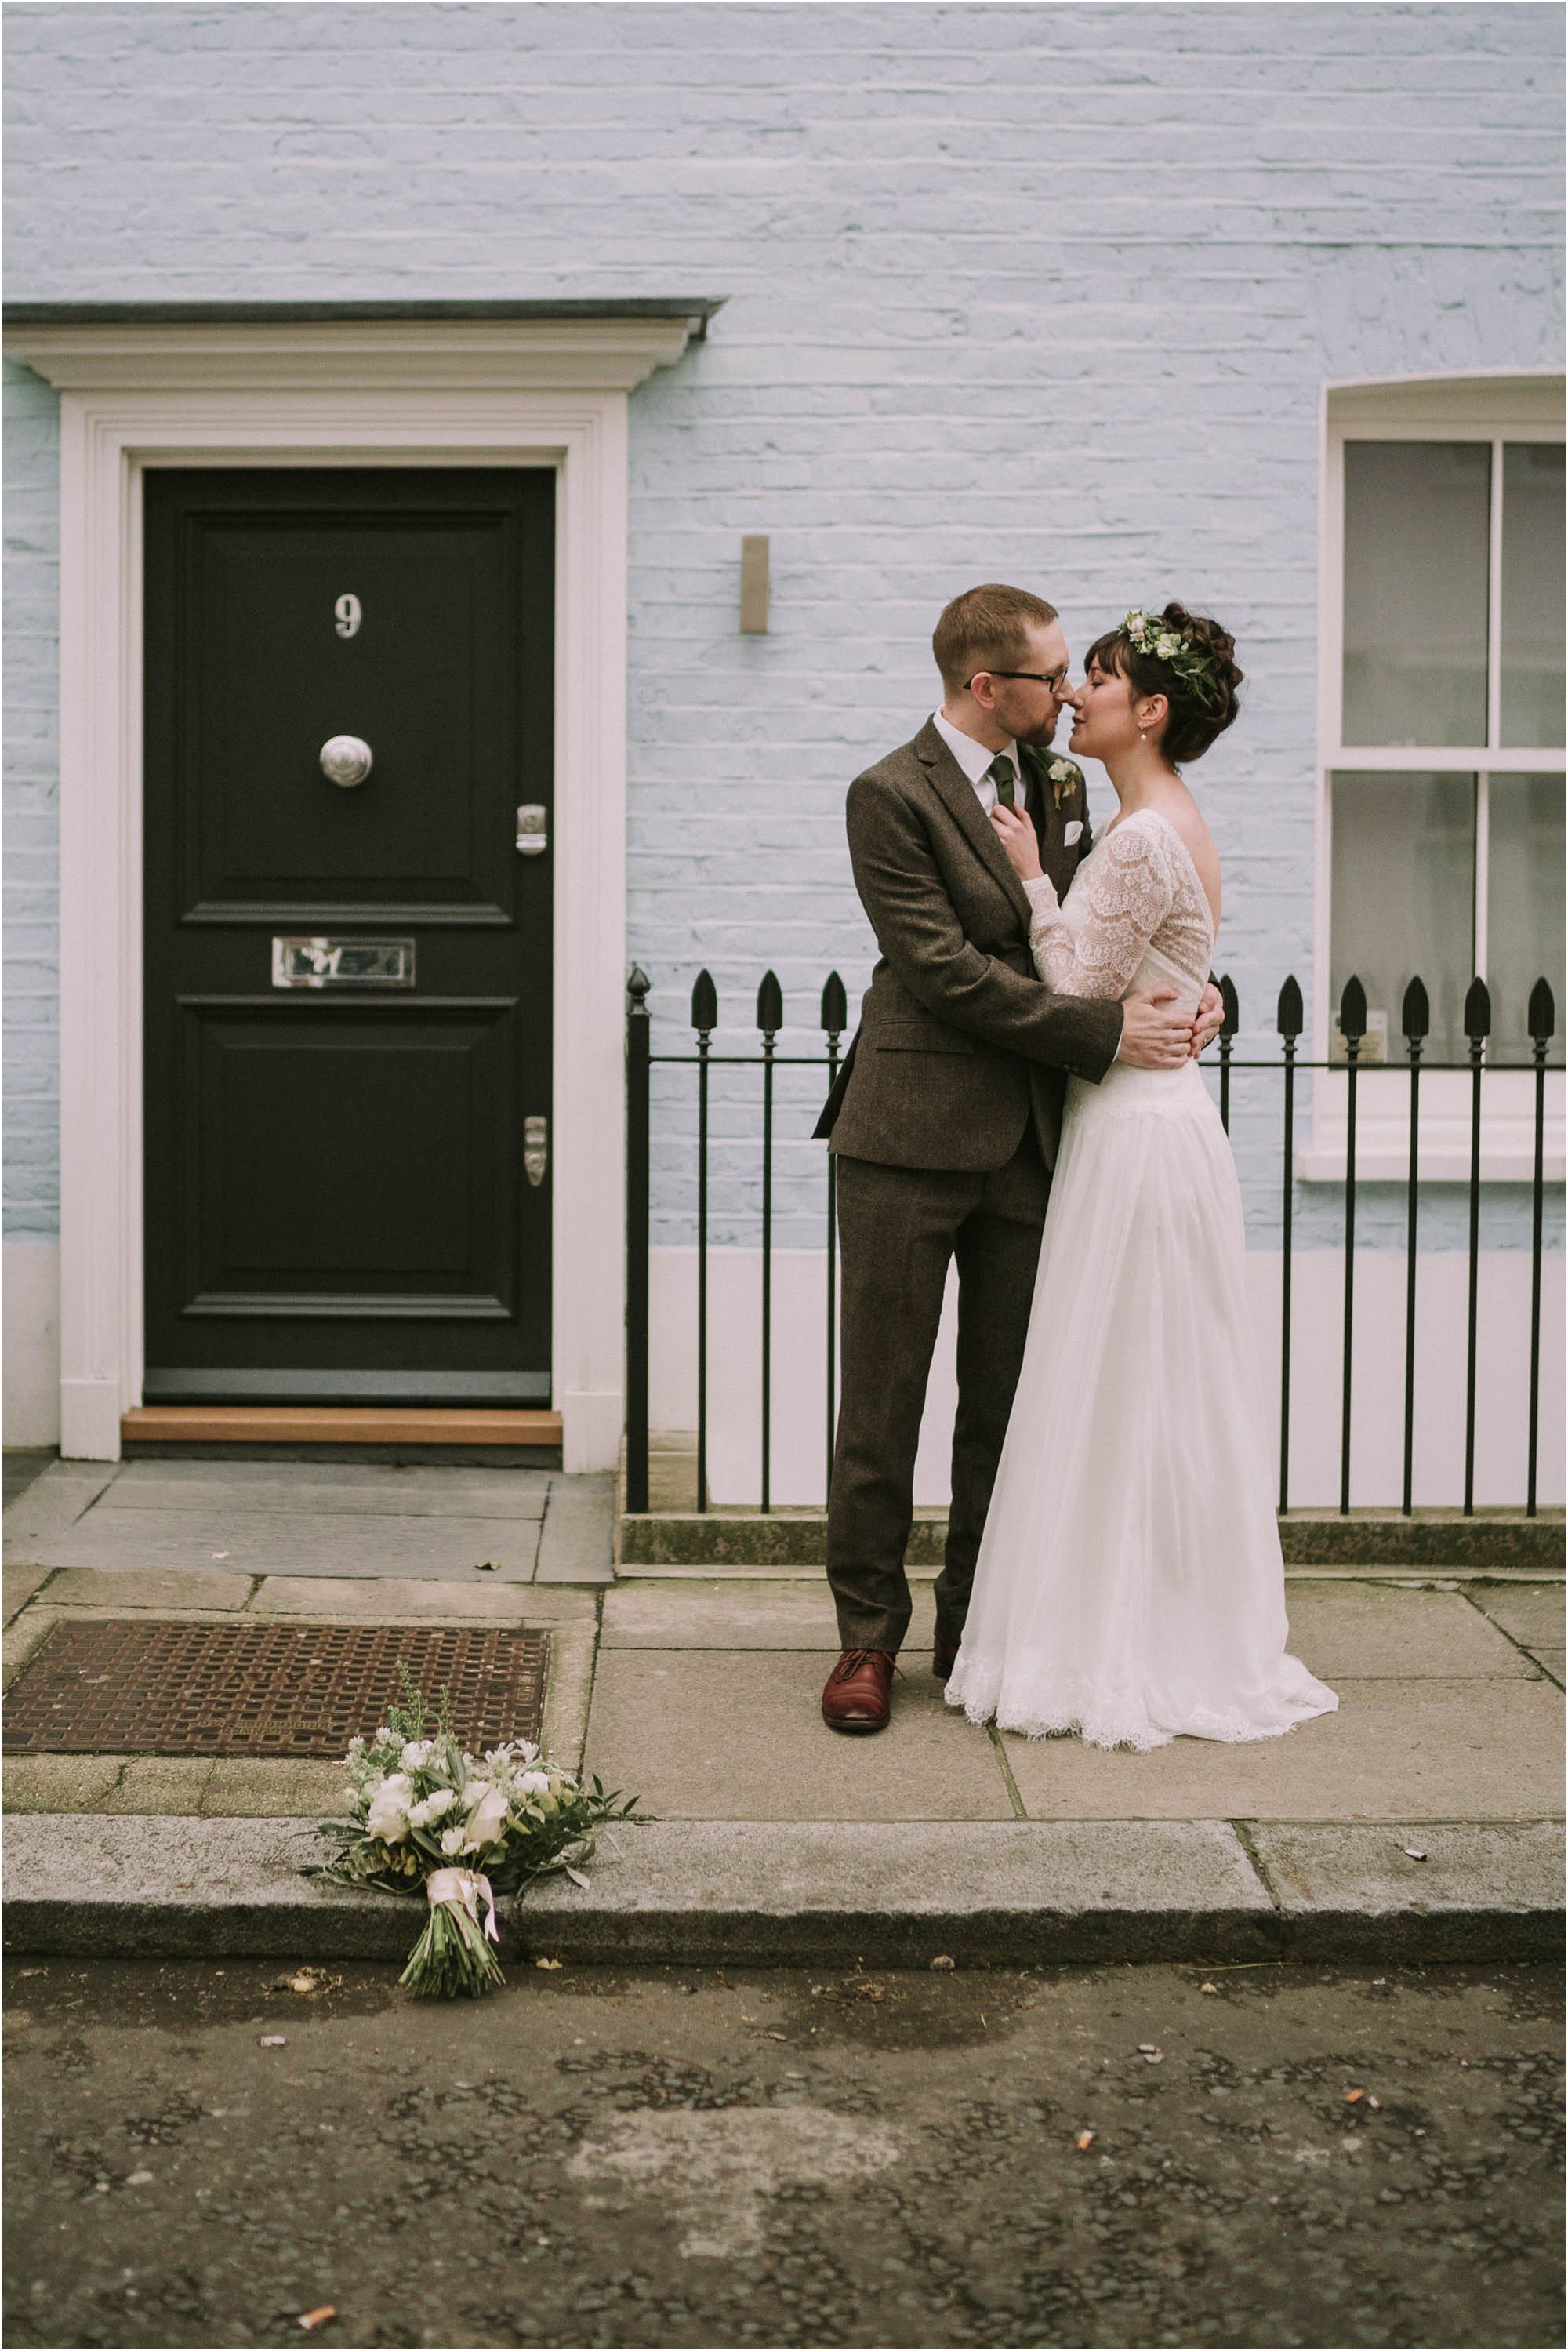 Bride and Groom against london coloured house